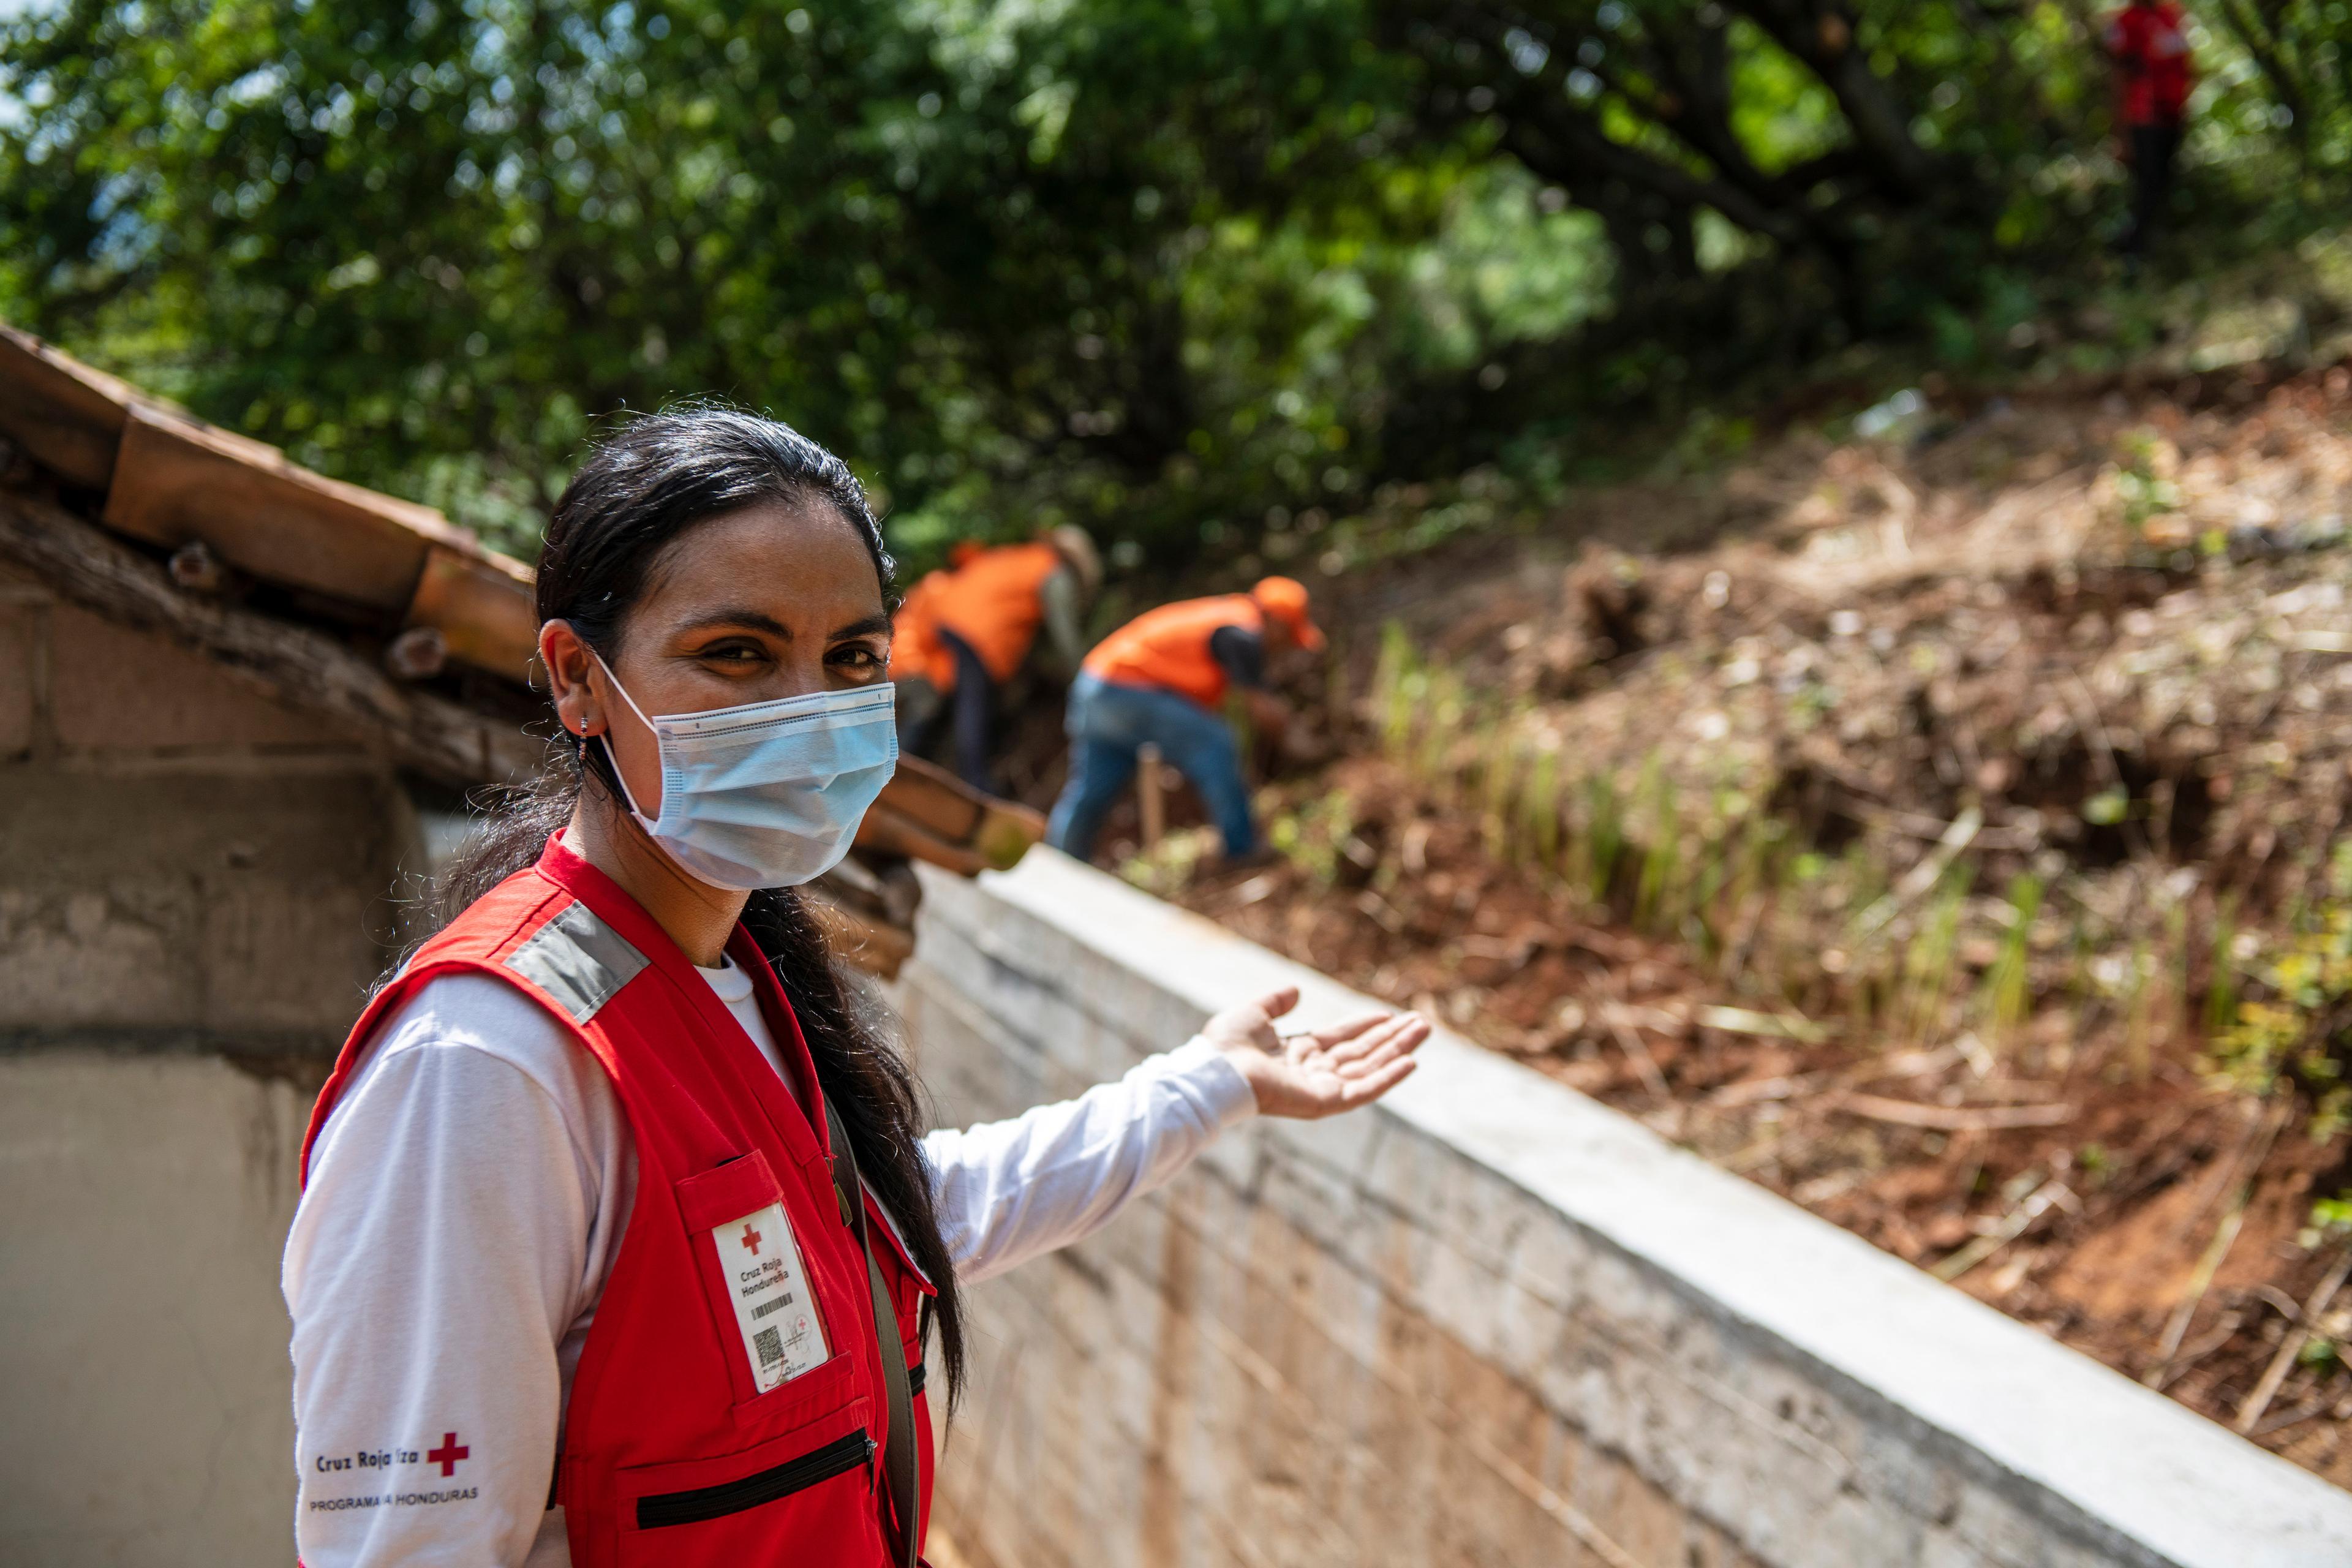 A woman wearing a red waistcoat and sanitary mask looking at the camera, in the back two farm workers.